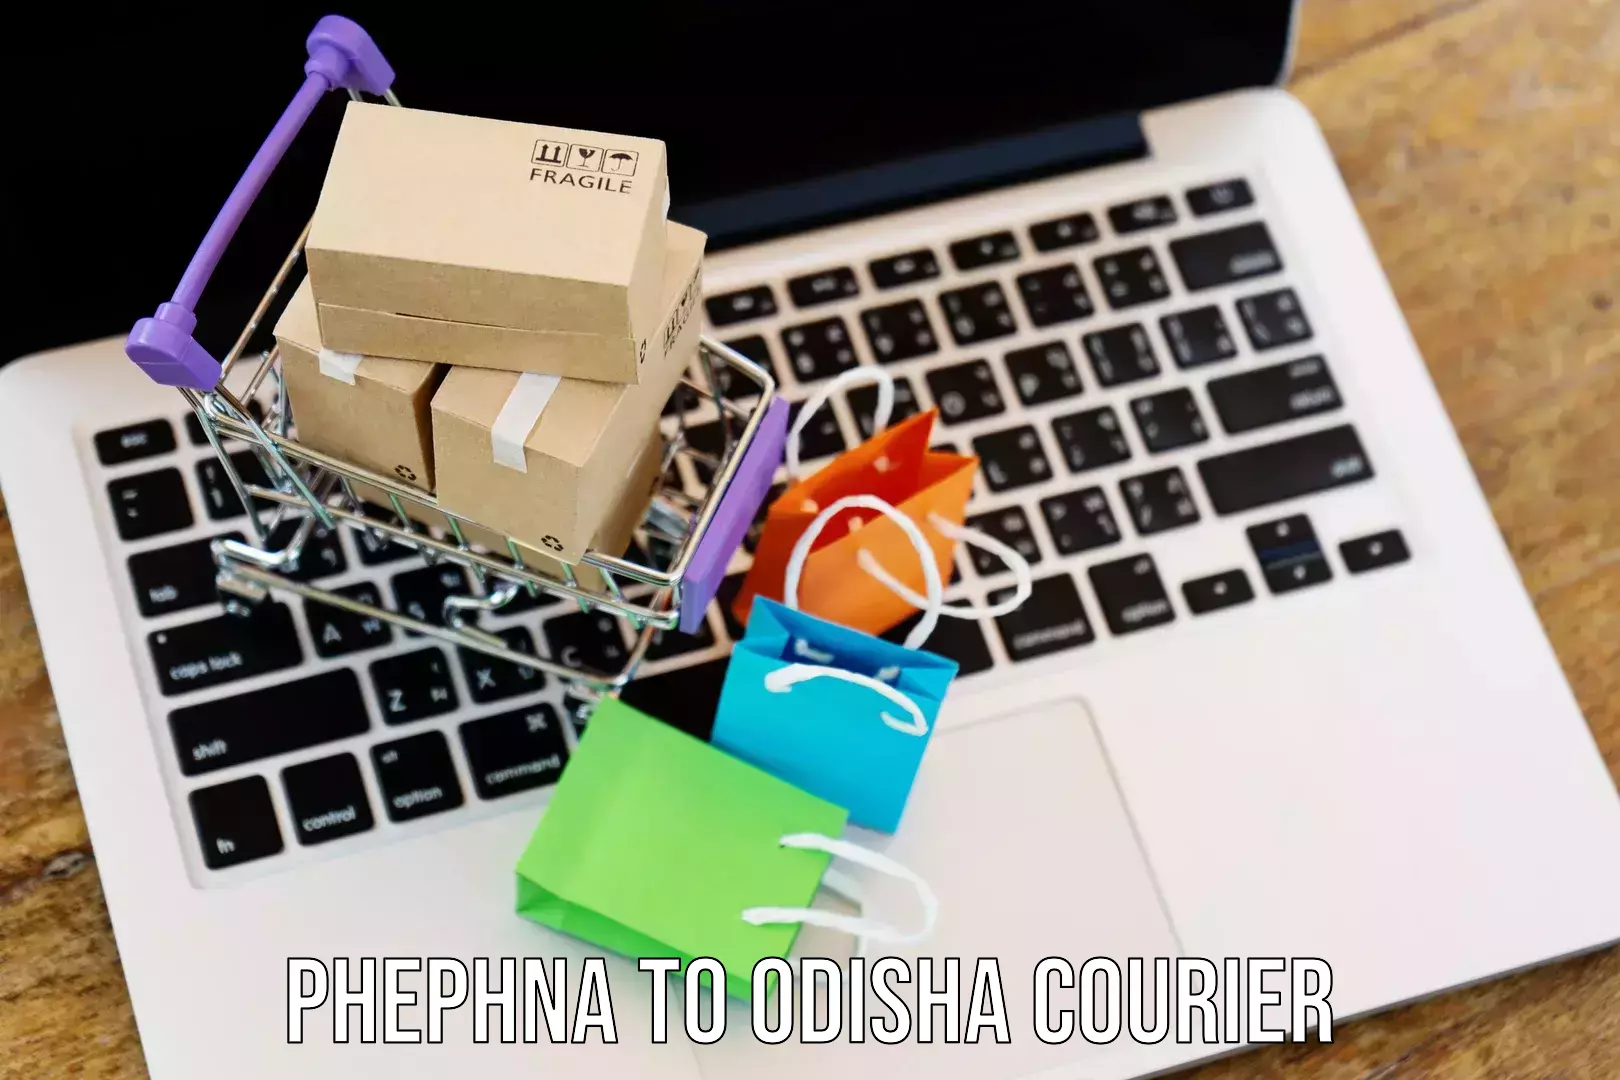 Fast-track shipping solutions Phephna to Odisha